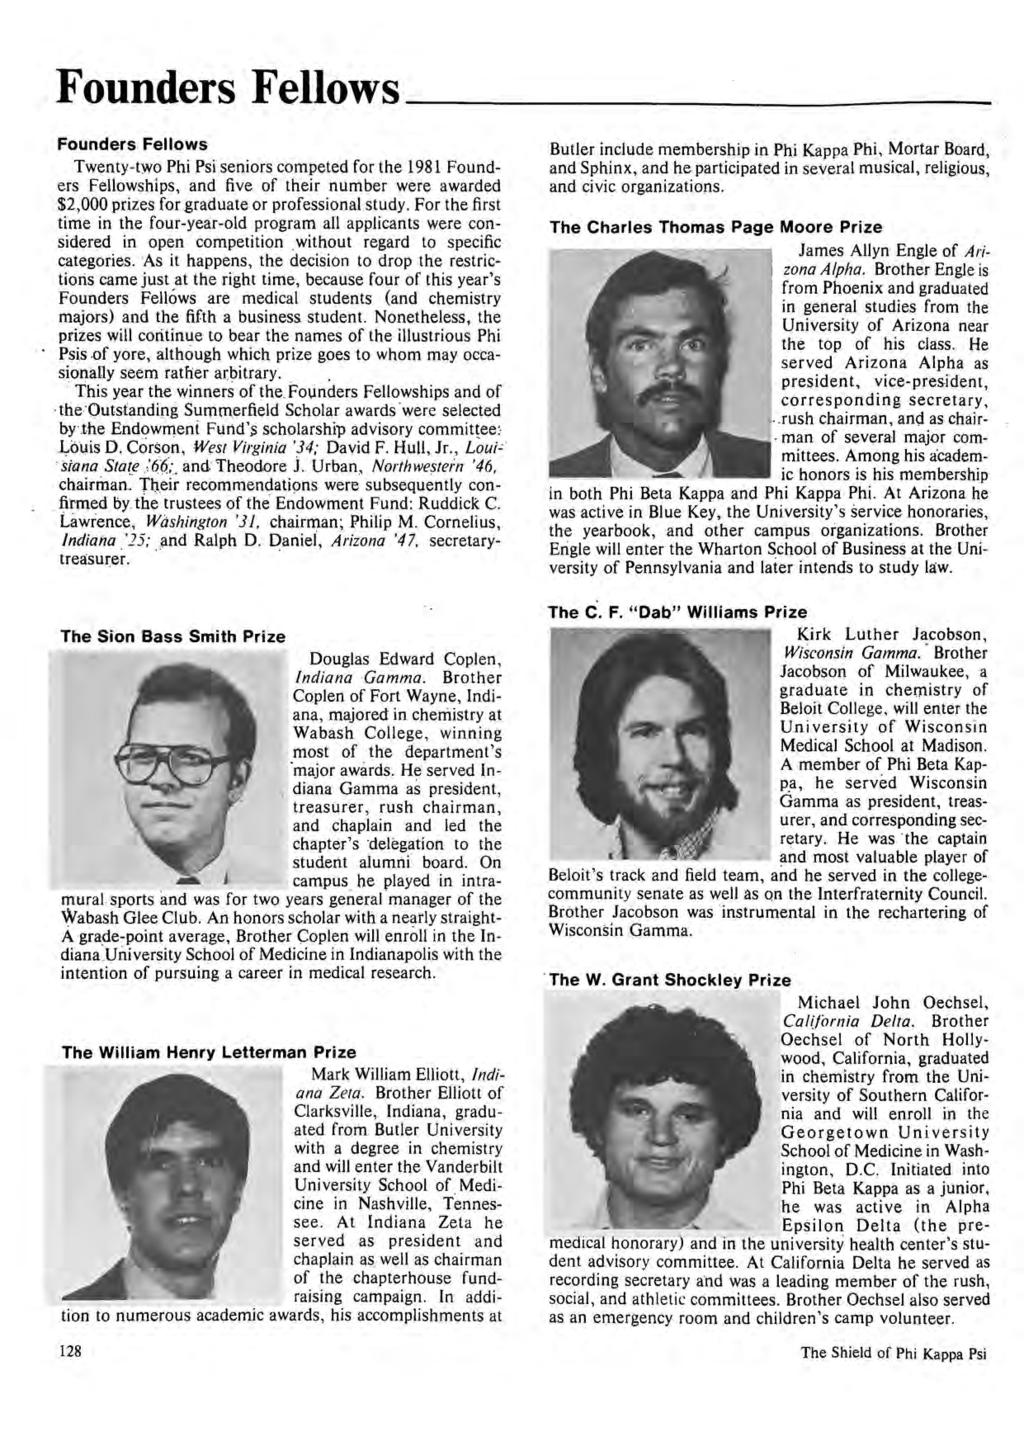 Founders Fellows Founders Fellows Twenty-two Phi Psi seniors competed for the 1981 Founders Fellowships, and five of their number were awarded $2,000 prizes for graduate or professional study.